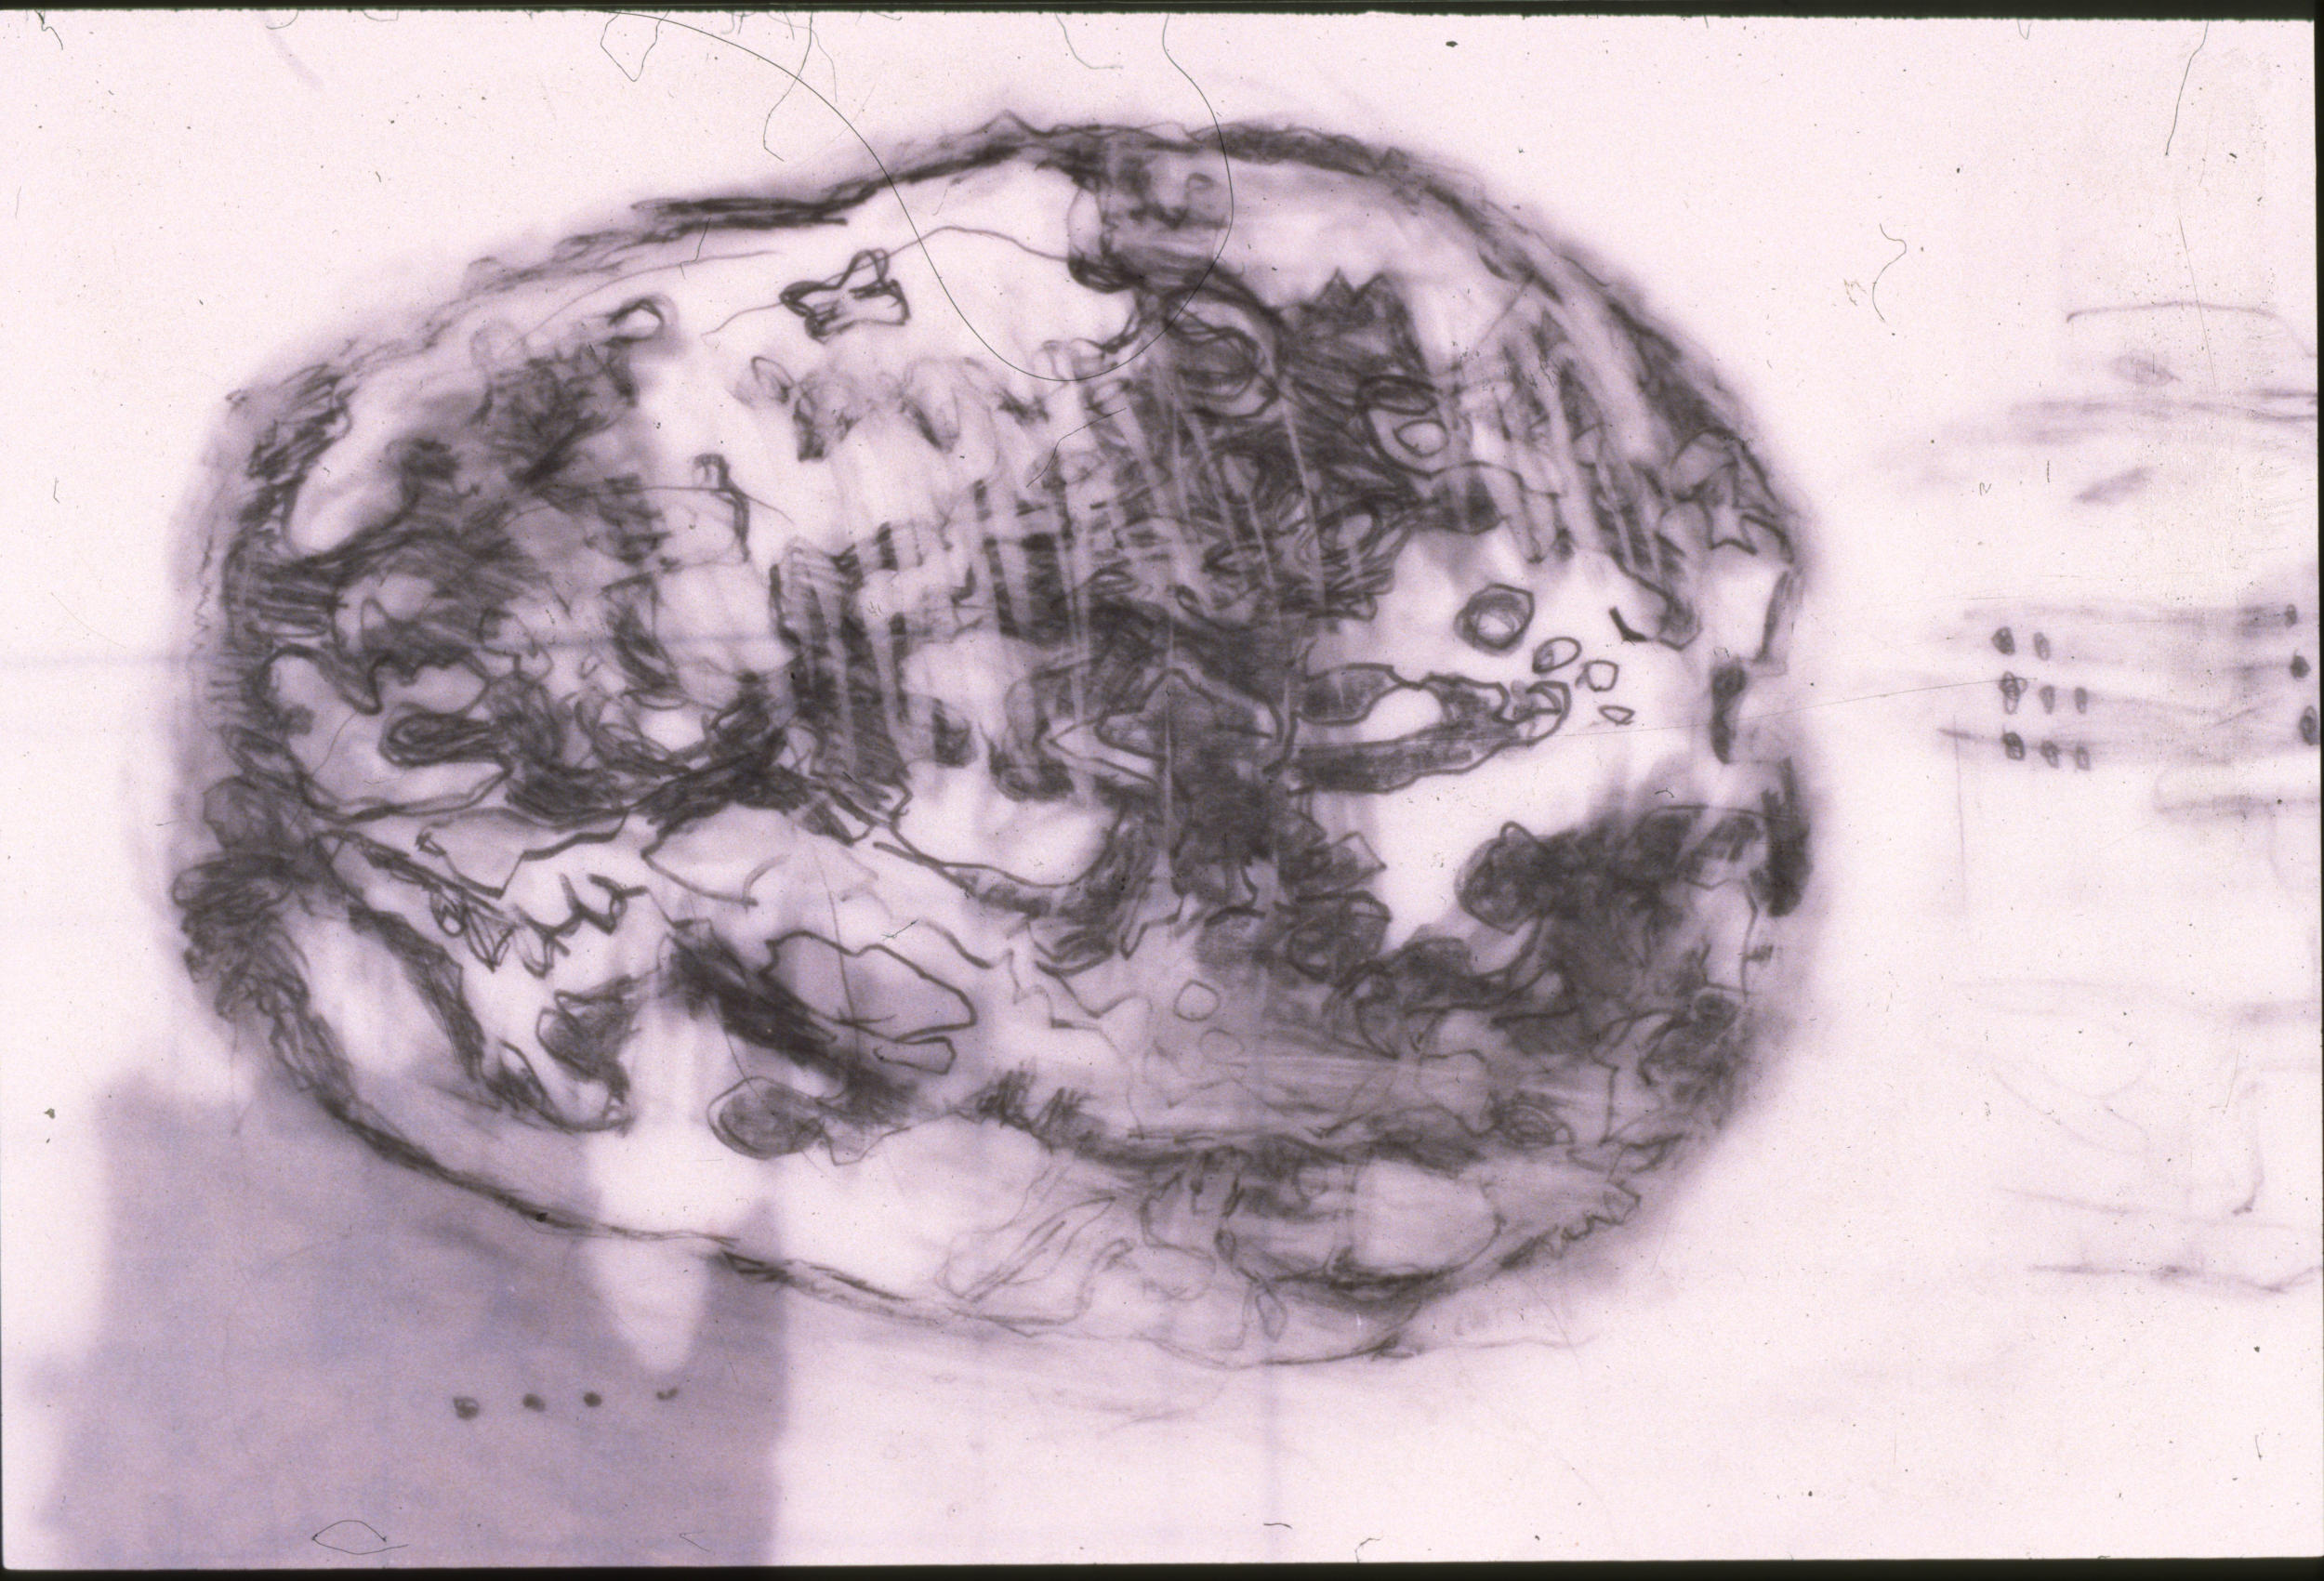 Mapping of Memories Series No. 1, graphite on Mylar, 9 x 12 inches, 2001